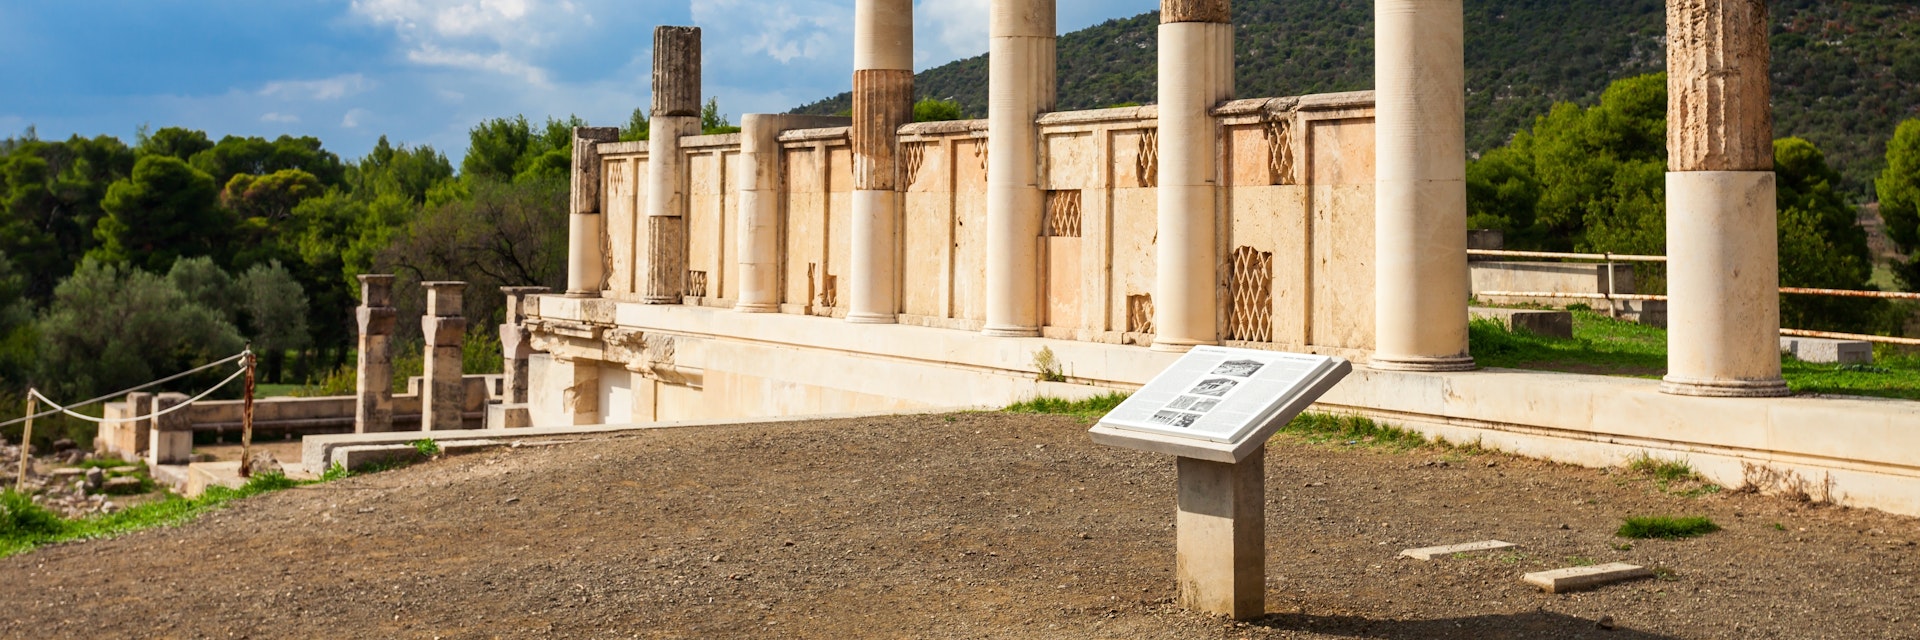 Abaton of Epidaurus at the sanctuary in Greece. Epidaurus is a ancient city dedicated to the ancient Greek God of medicine Asclepius.; Shutterstock ID 1111555640; your: Barbara Di Castro; gl: 65050; netsuite: digital; full: poi
1111555640